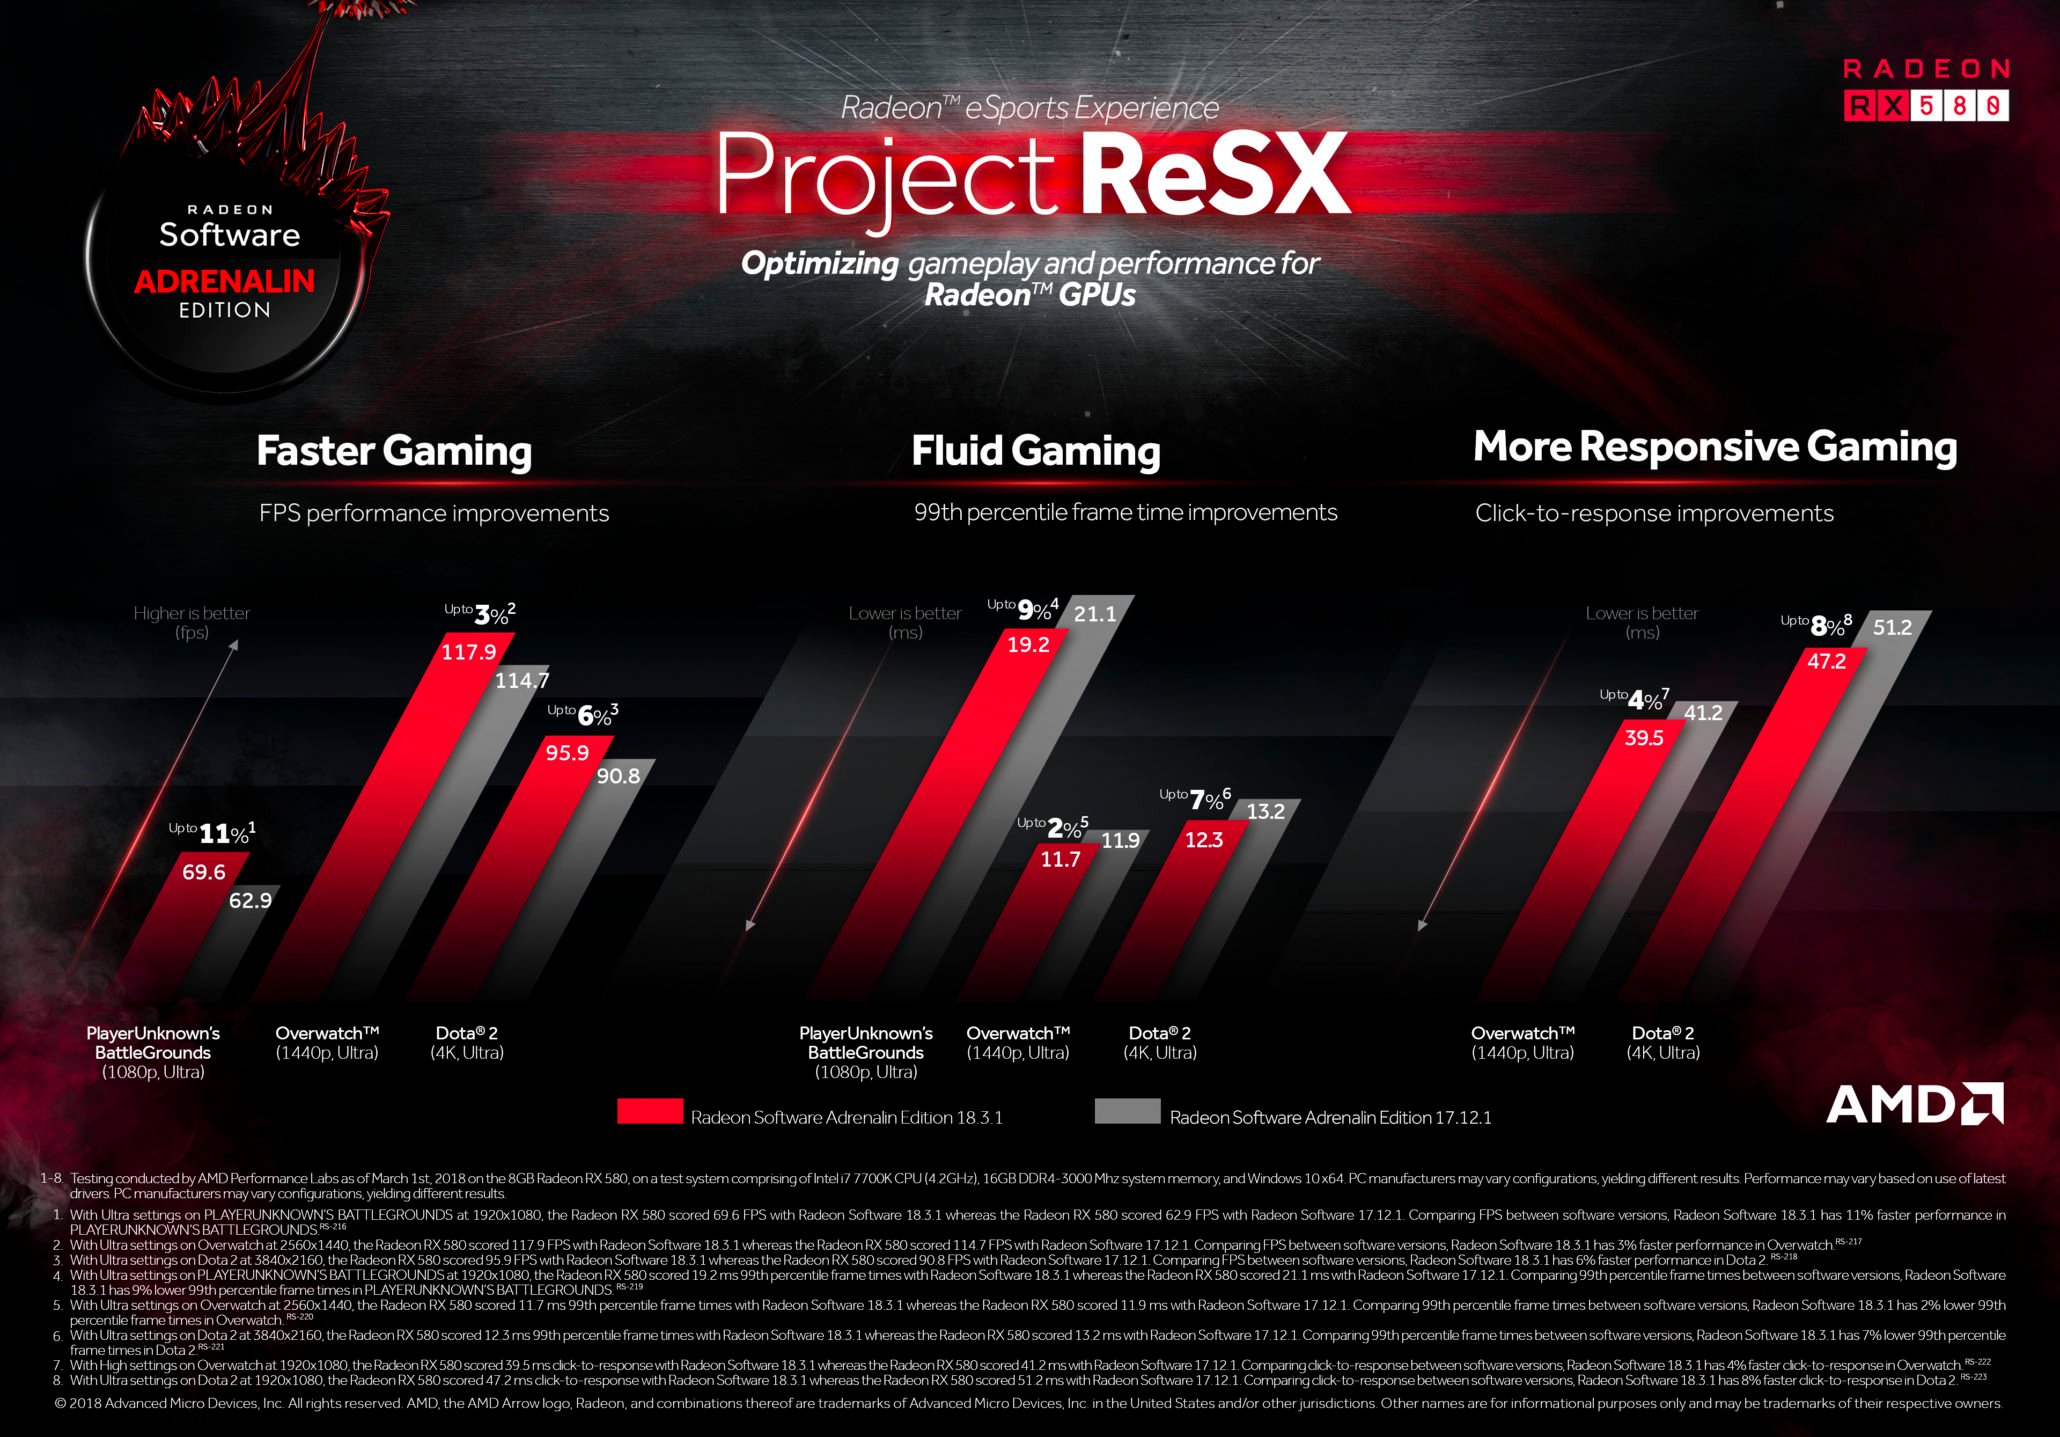 Radeon performance boost for esports games with Project ReSX